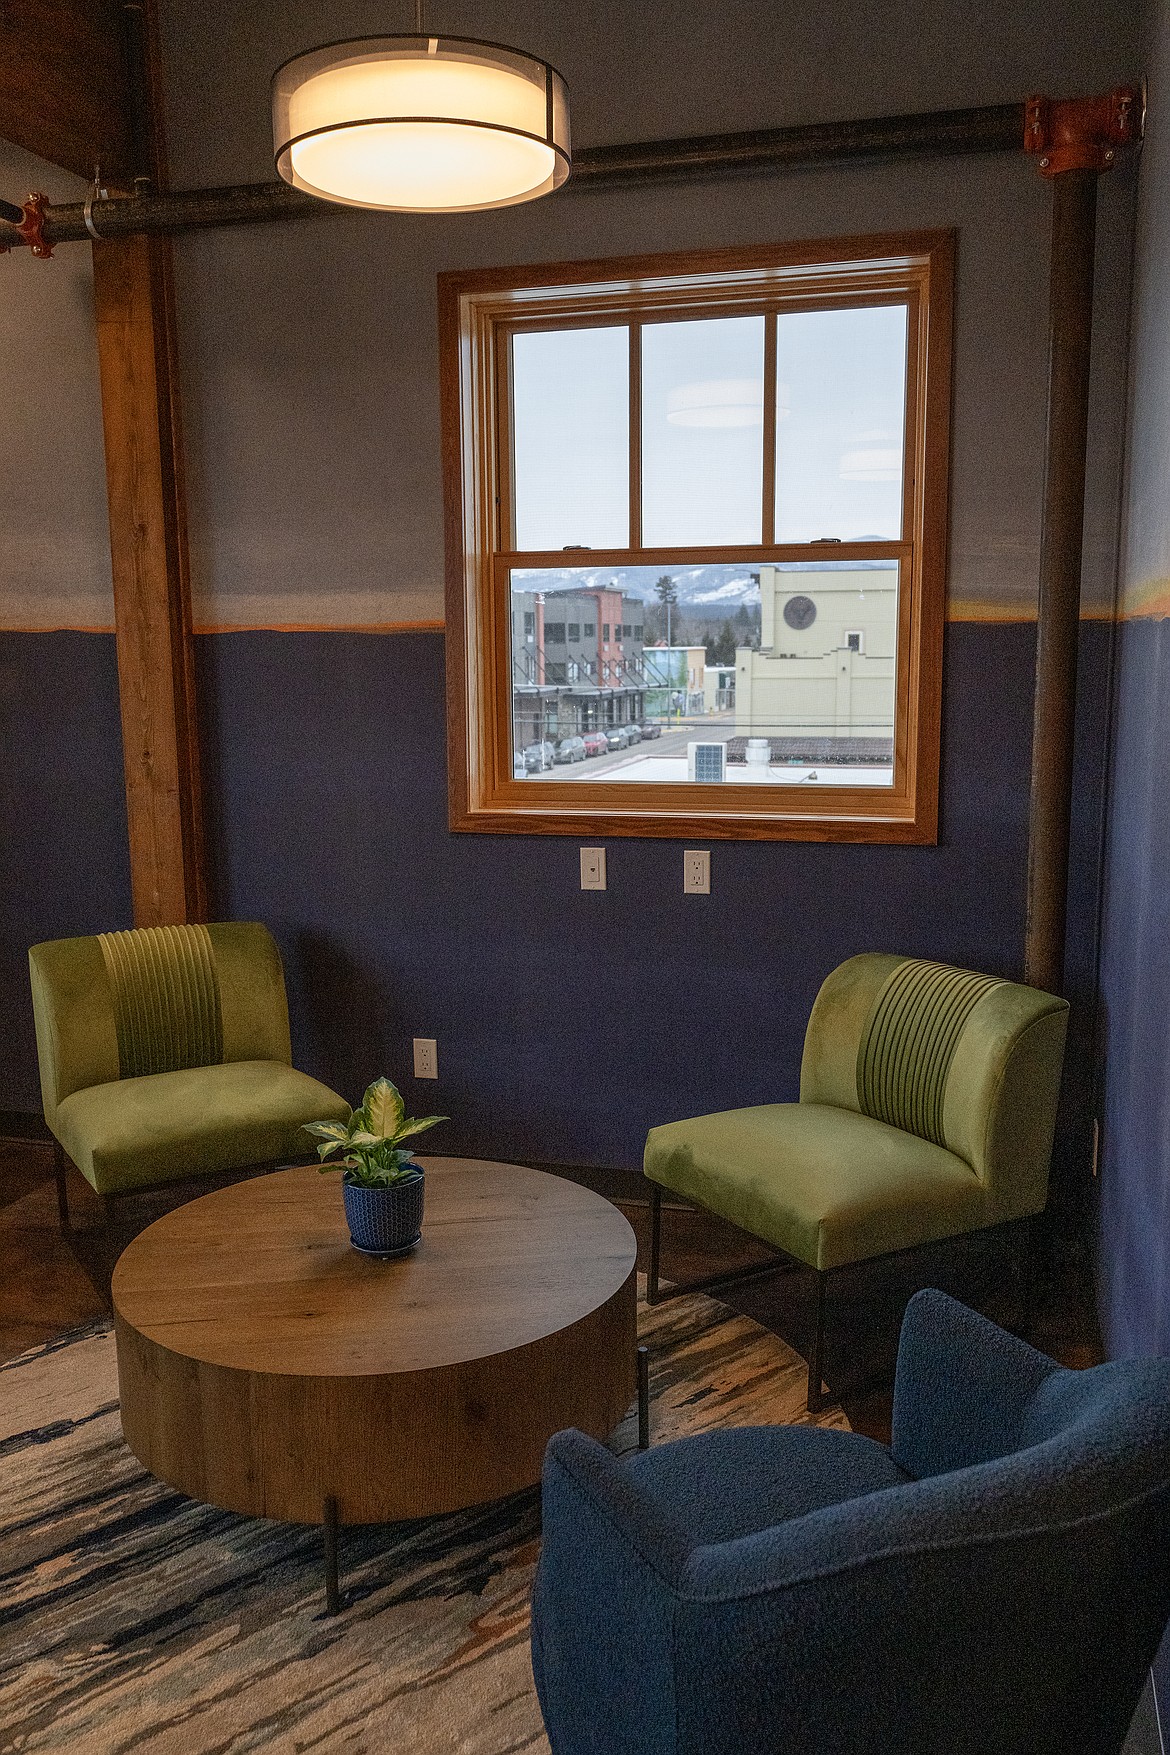 From the new third story of Uptown Hearth, all of Nucleus Avenue is visible. The space has been designed as a co-working area, where people can rent out an office area with wifi for an hour or a month. (Avery Howe photo)